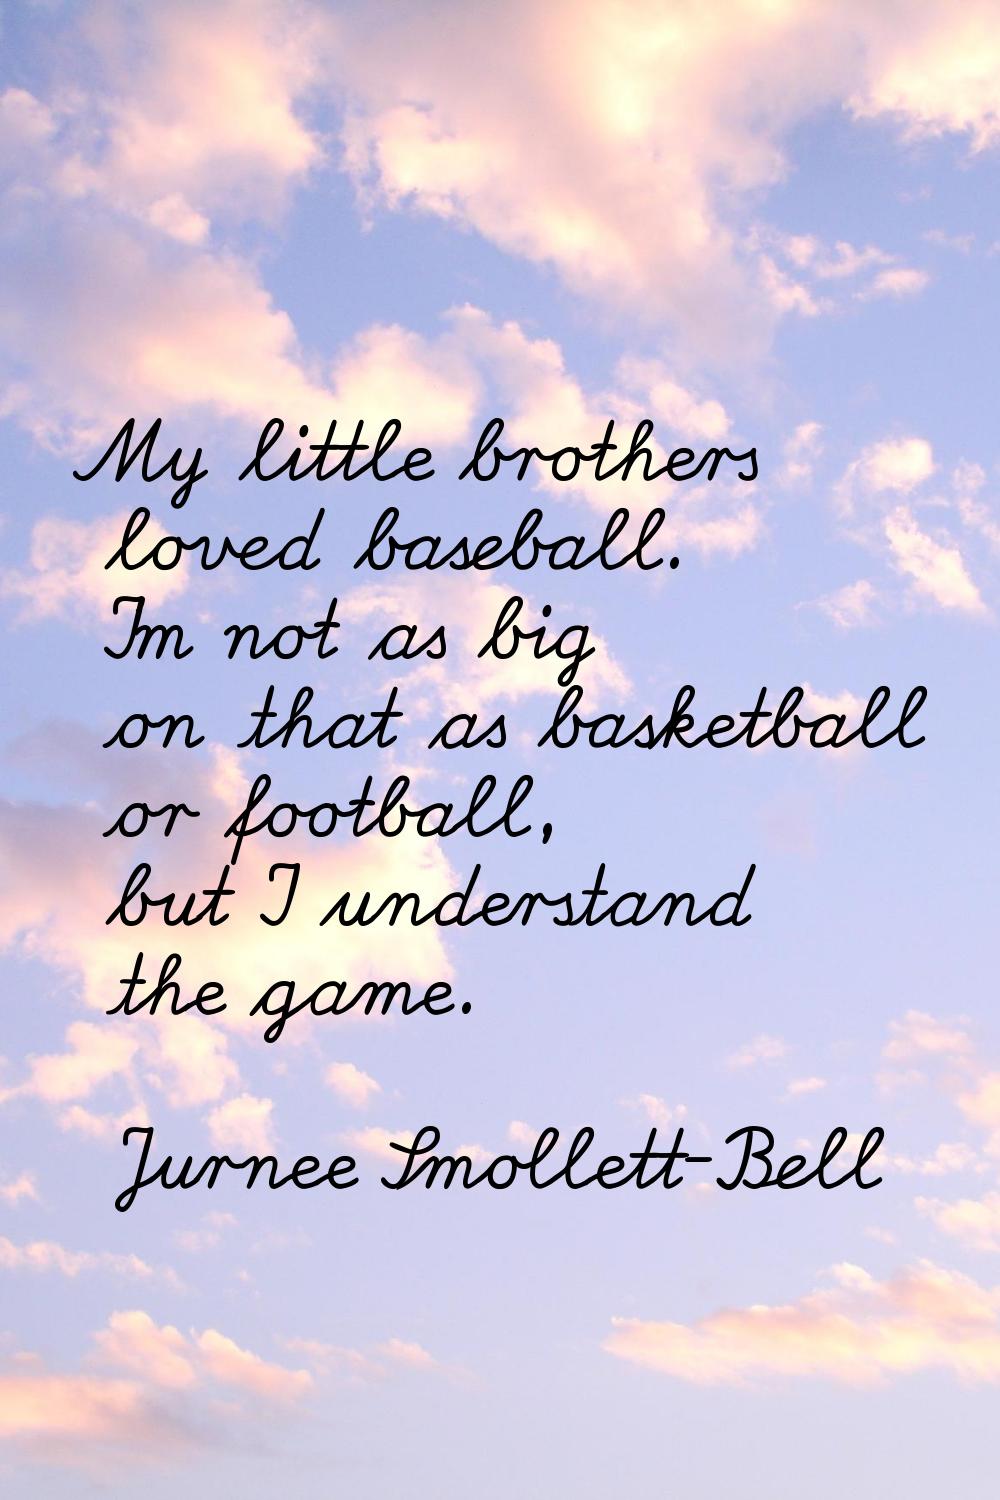 My little brothers loved baseball. I'm not as big on that as basketball or football, but I understa